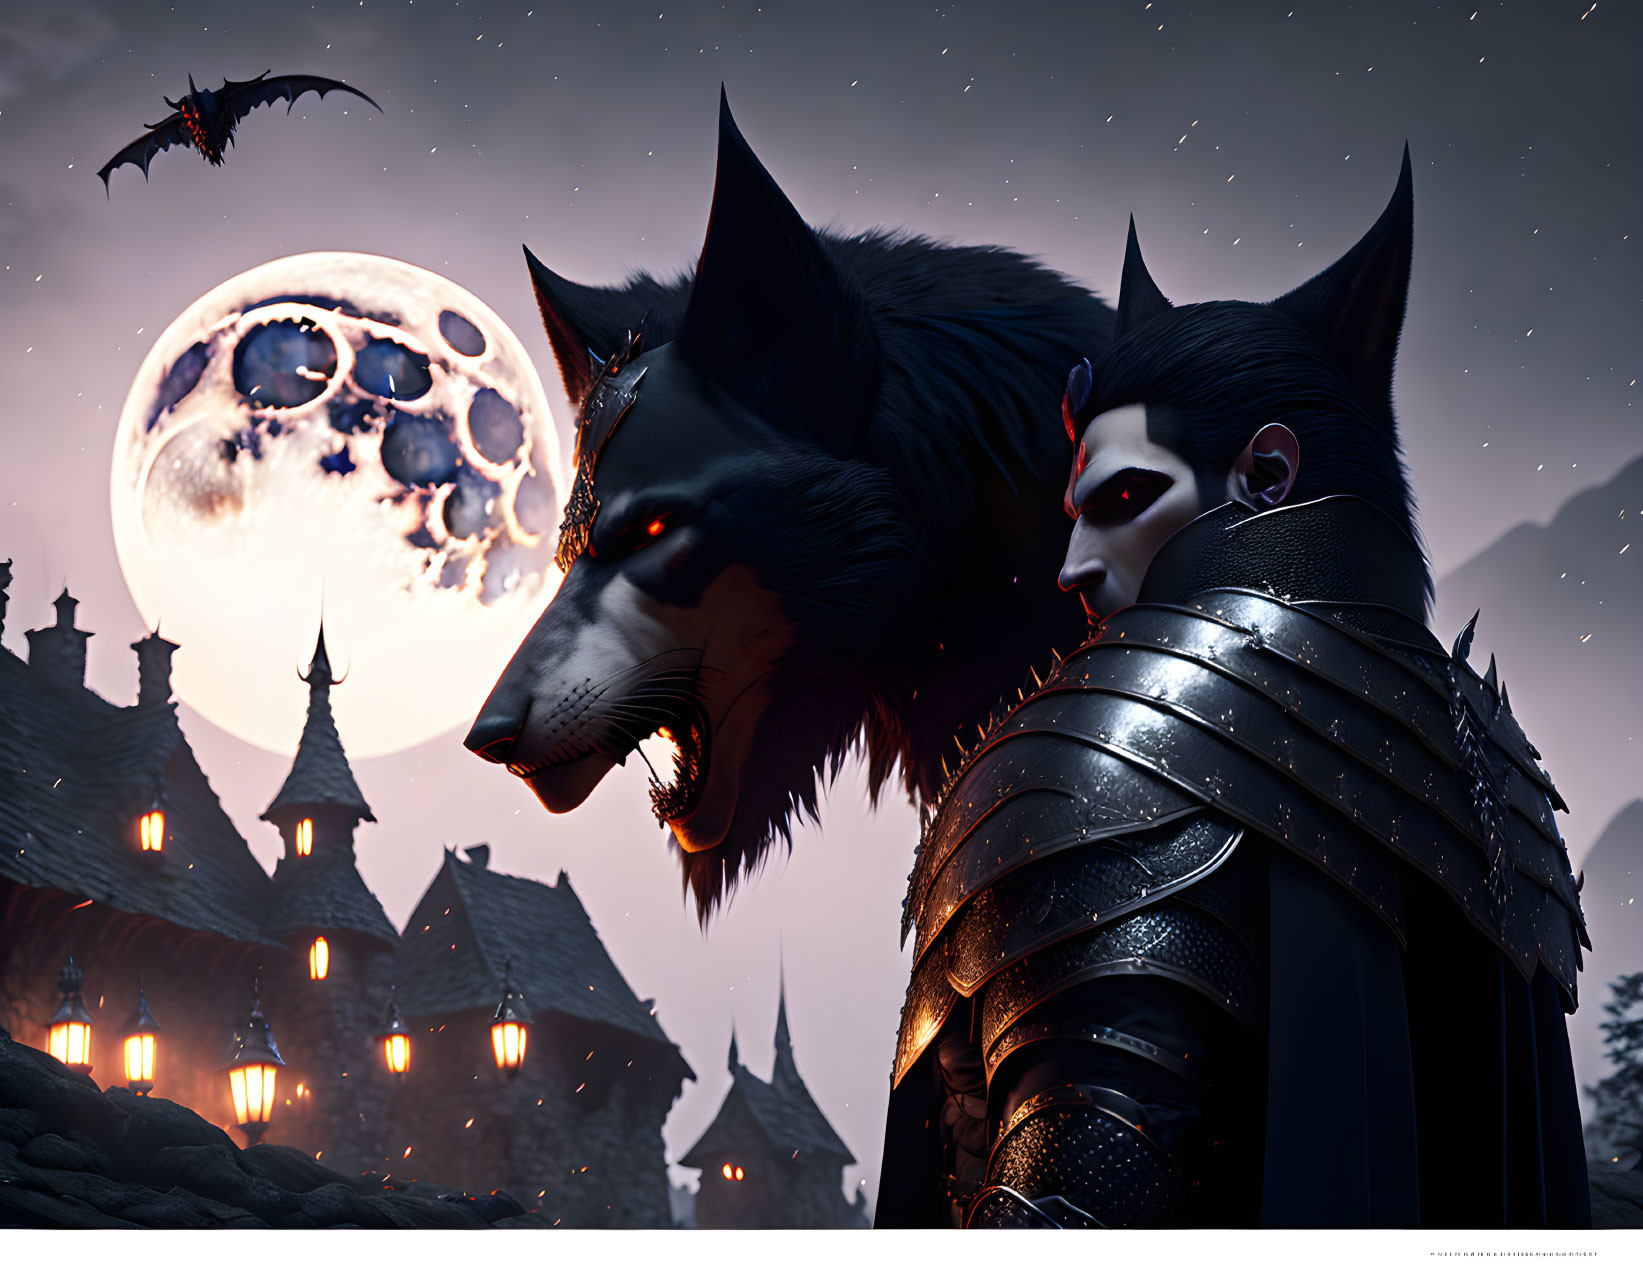 Gothic vampire, wolf, and dragon under full moon in medieval setting